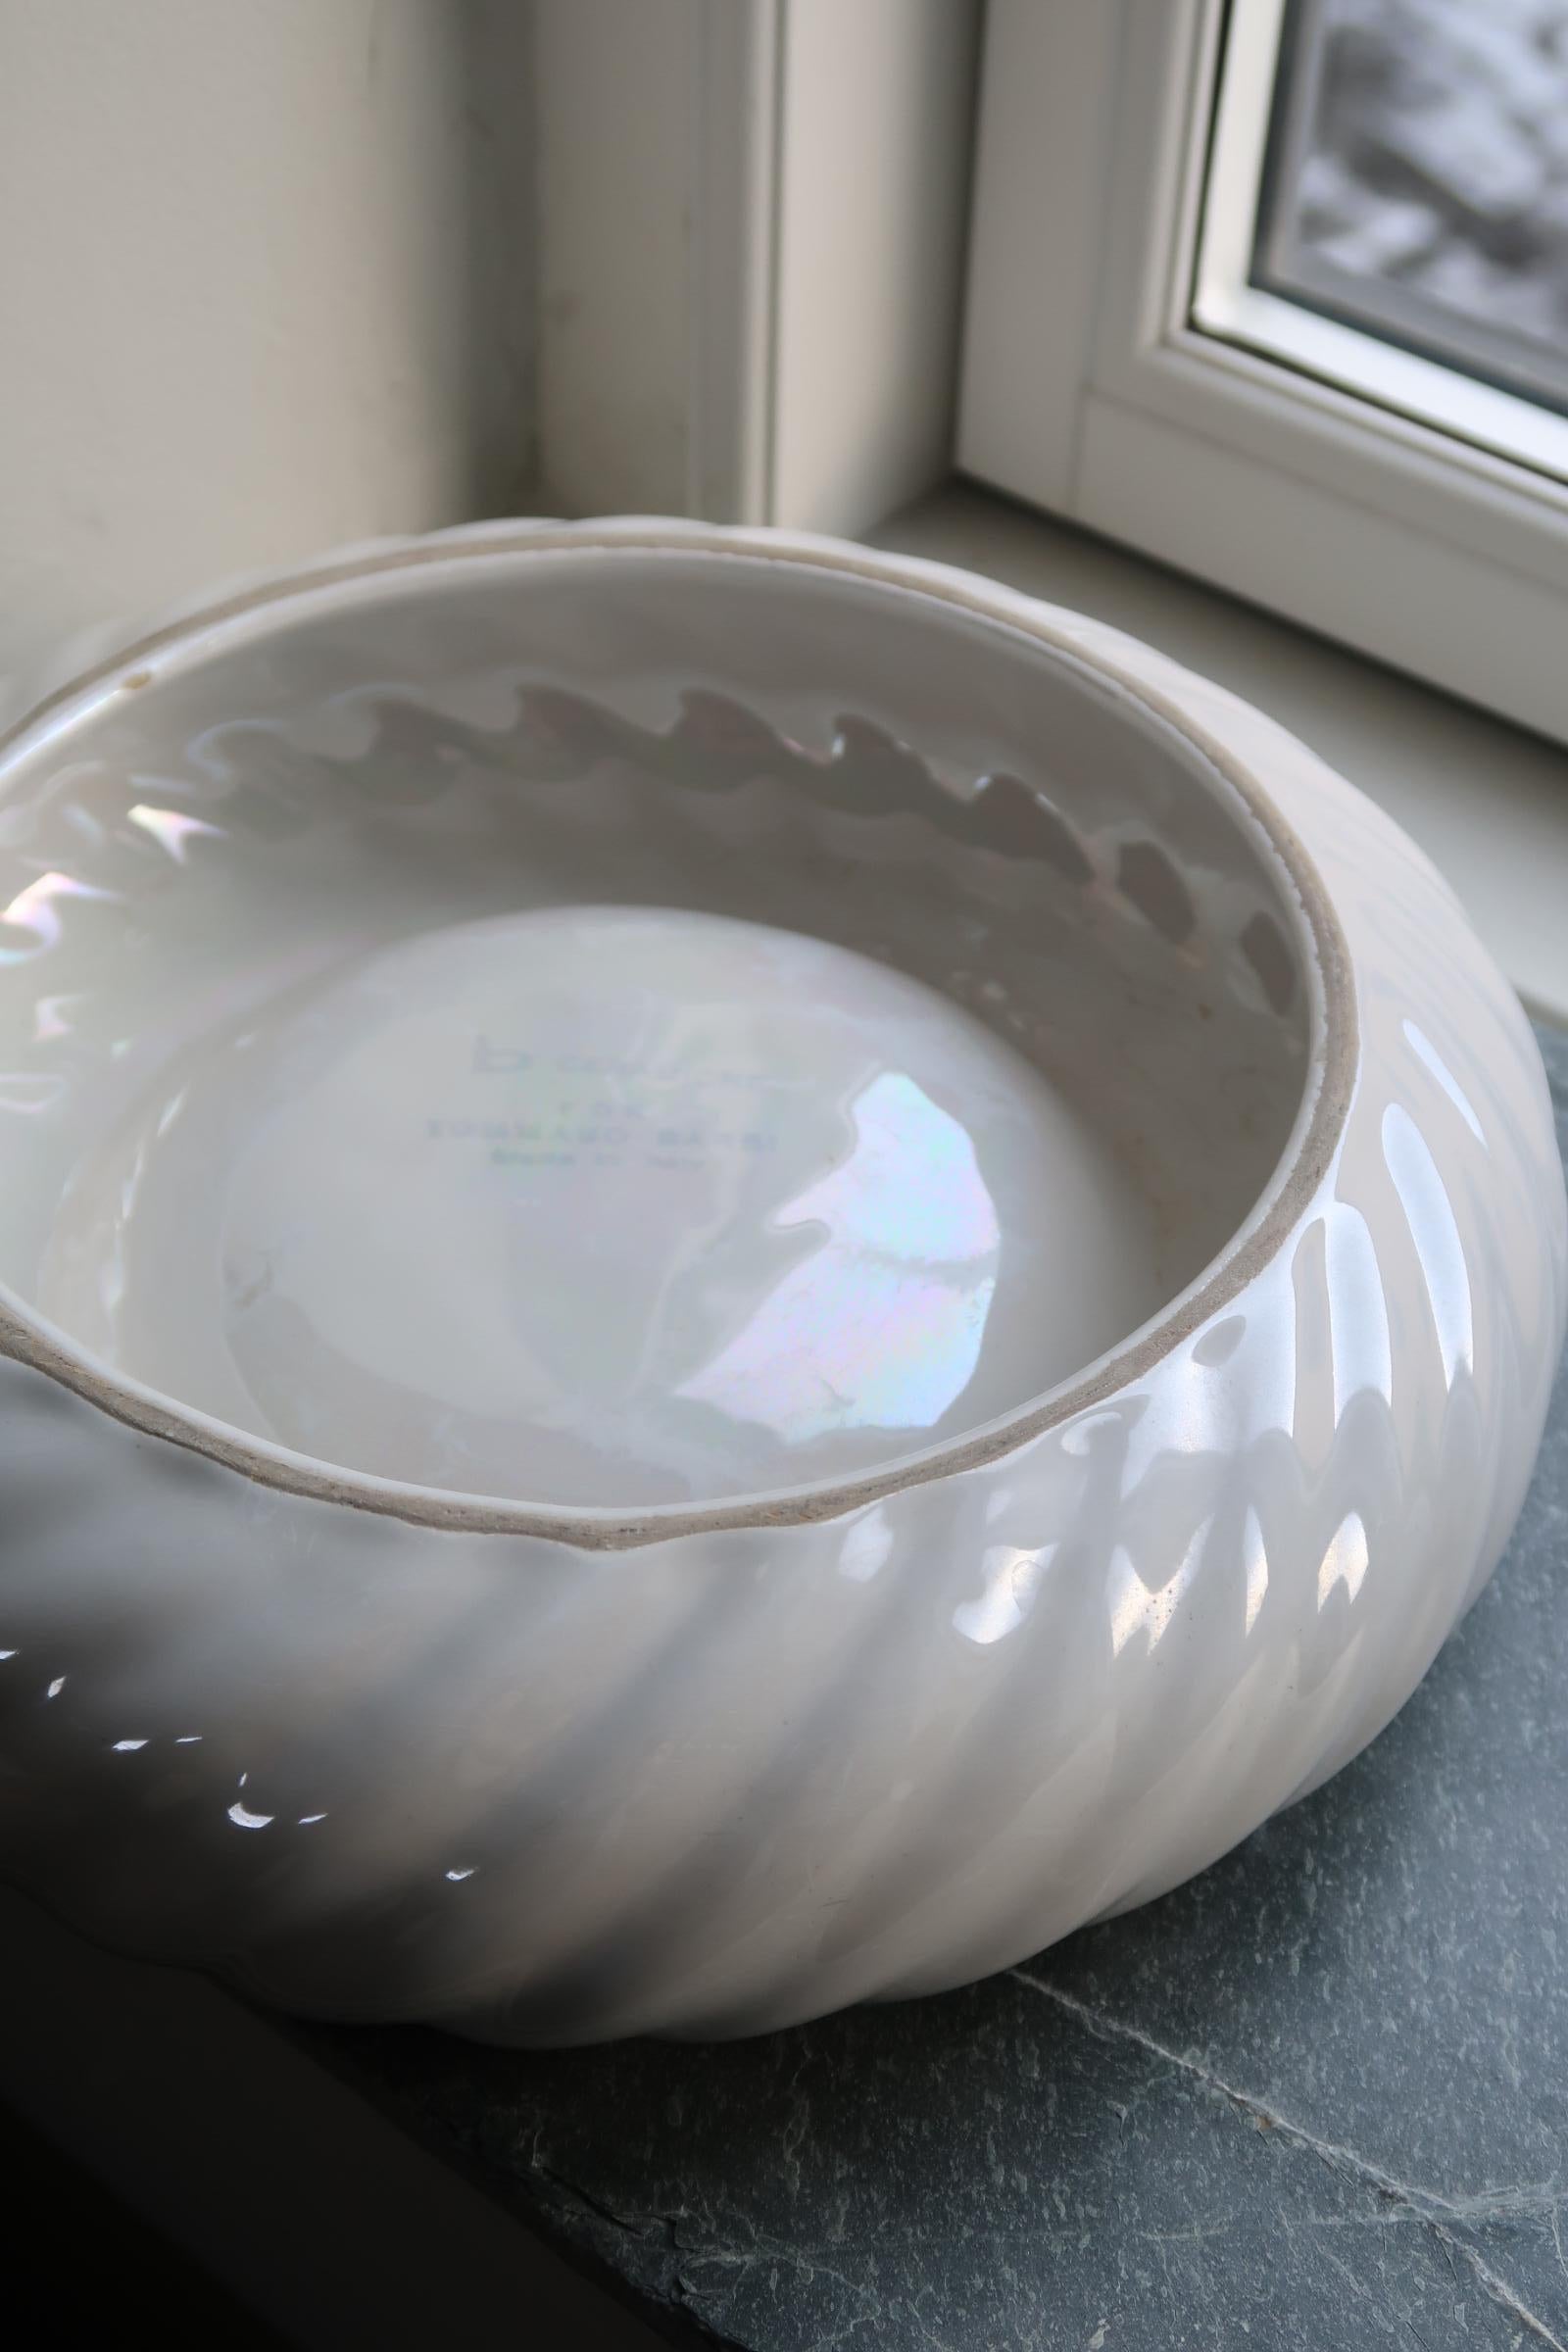 Original vintage Tommaso Barbi bowl in fluted ceramic. The bowl is handmade in Italy, 1970s, and signed on the bottom. Tommaso Barbi is a renowned Italian designer who, especially in the 1970s, designed whimsical and imaginative lamps and furniture.